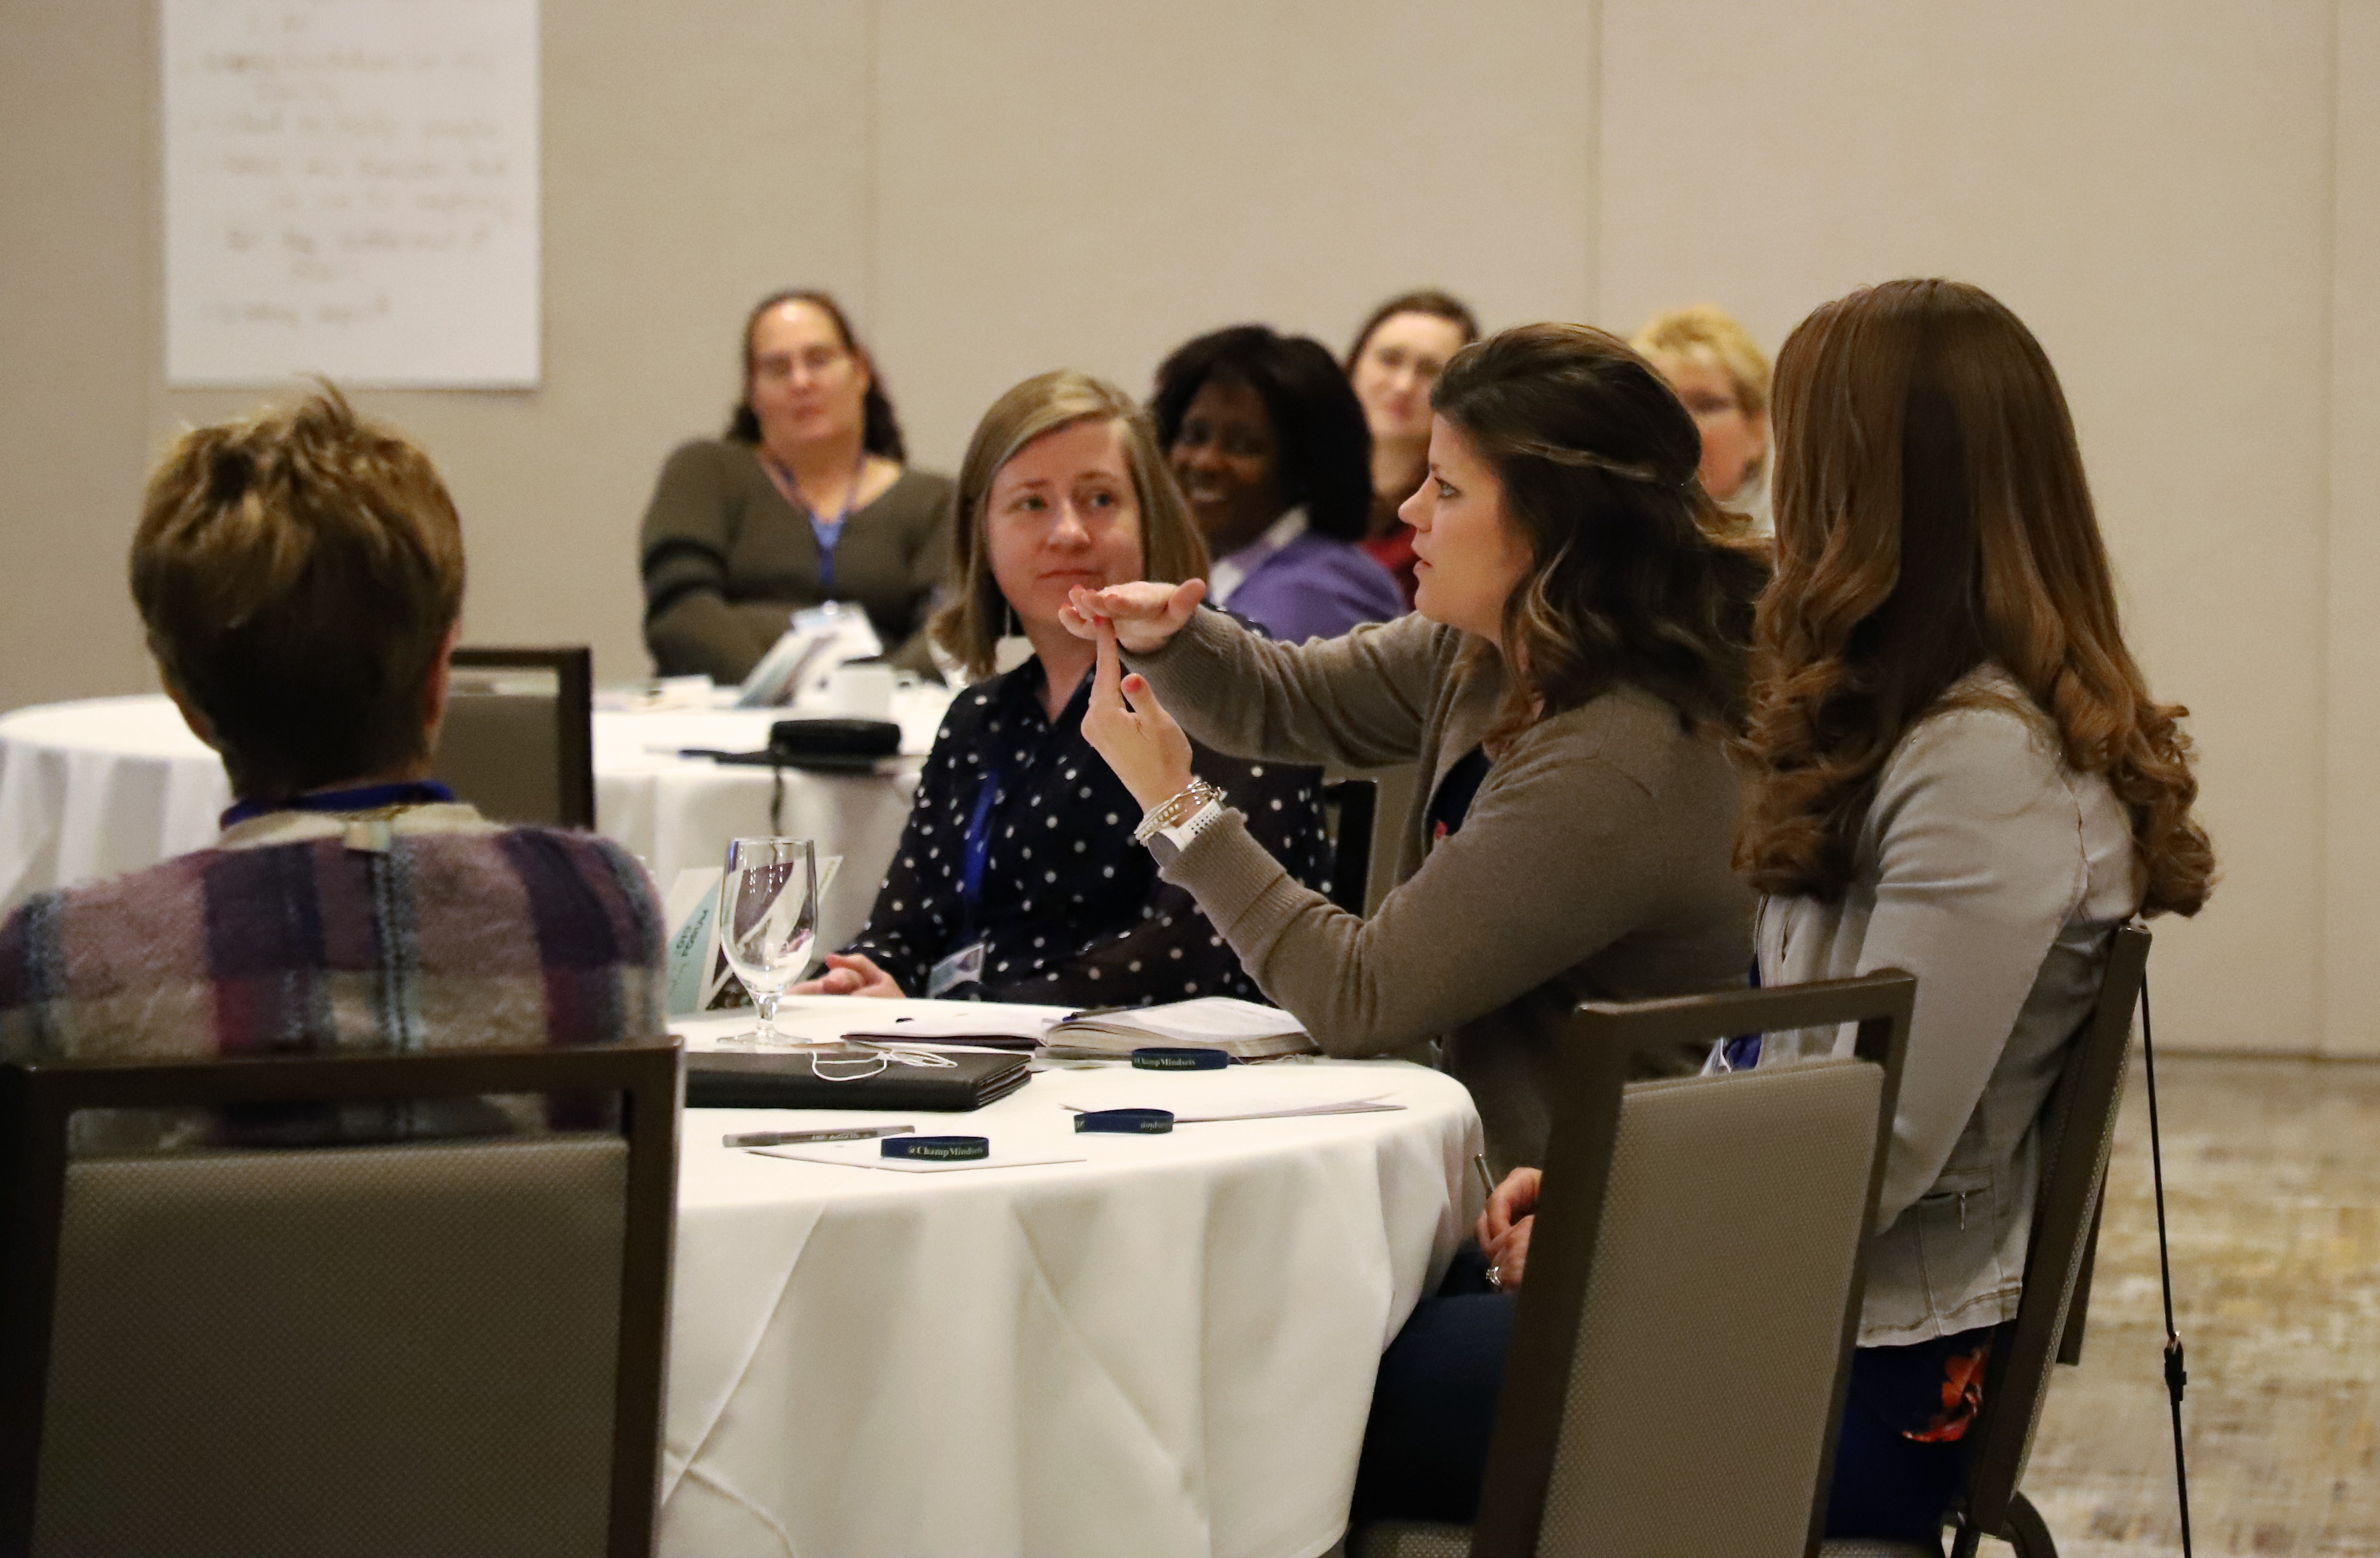 Attendees have the opportunity to network, make new contacts and learn from the experiences of other women in the finishing industry.